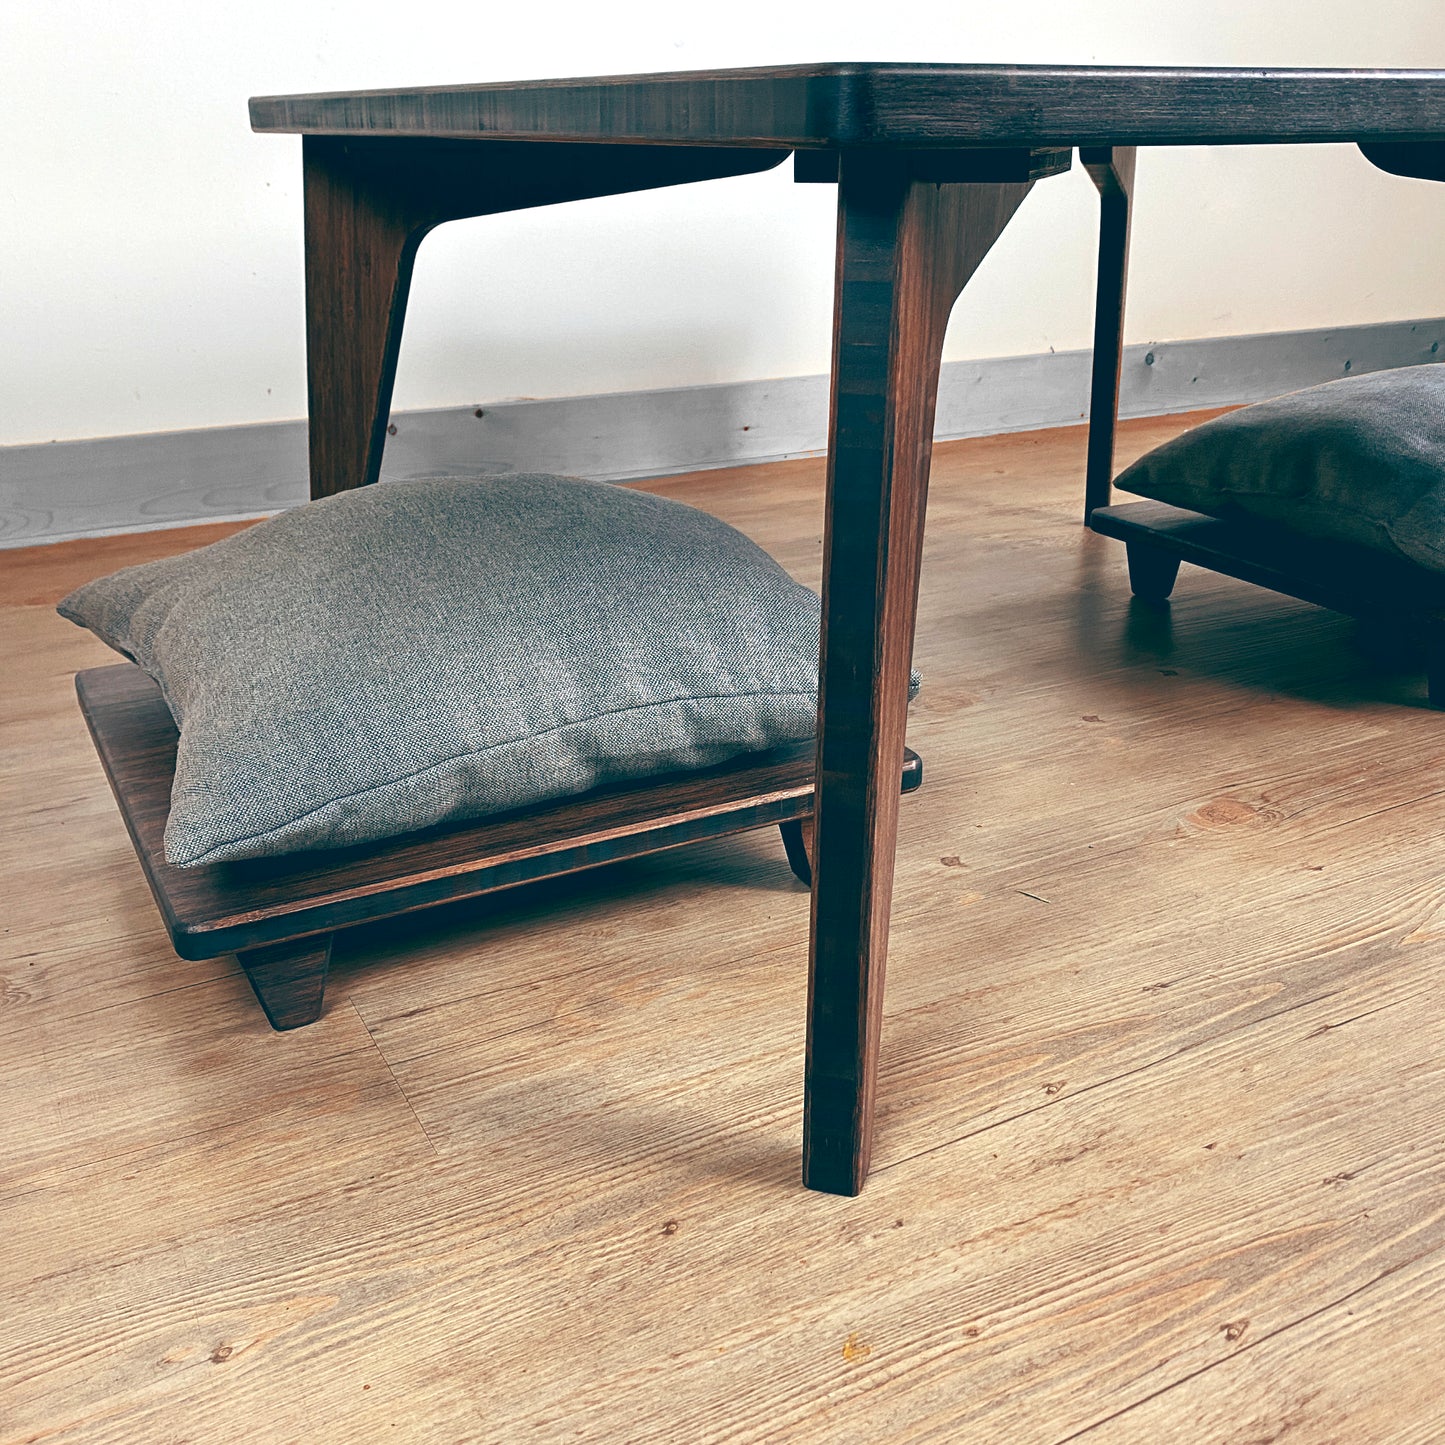 LOW Square Coffee Table: Ebony Bamboo - Large